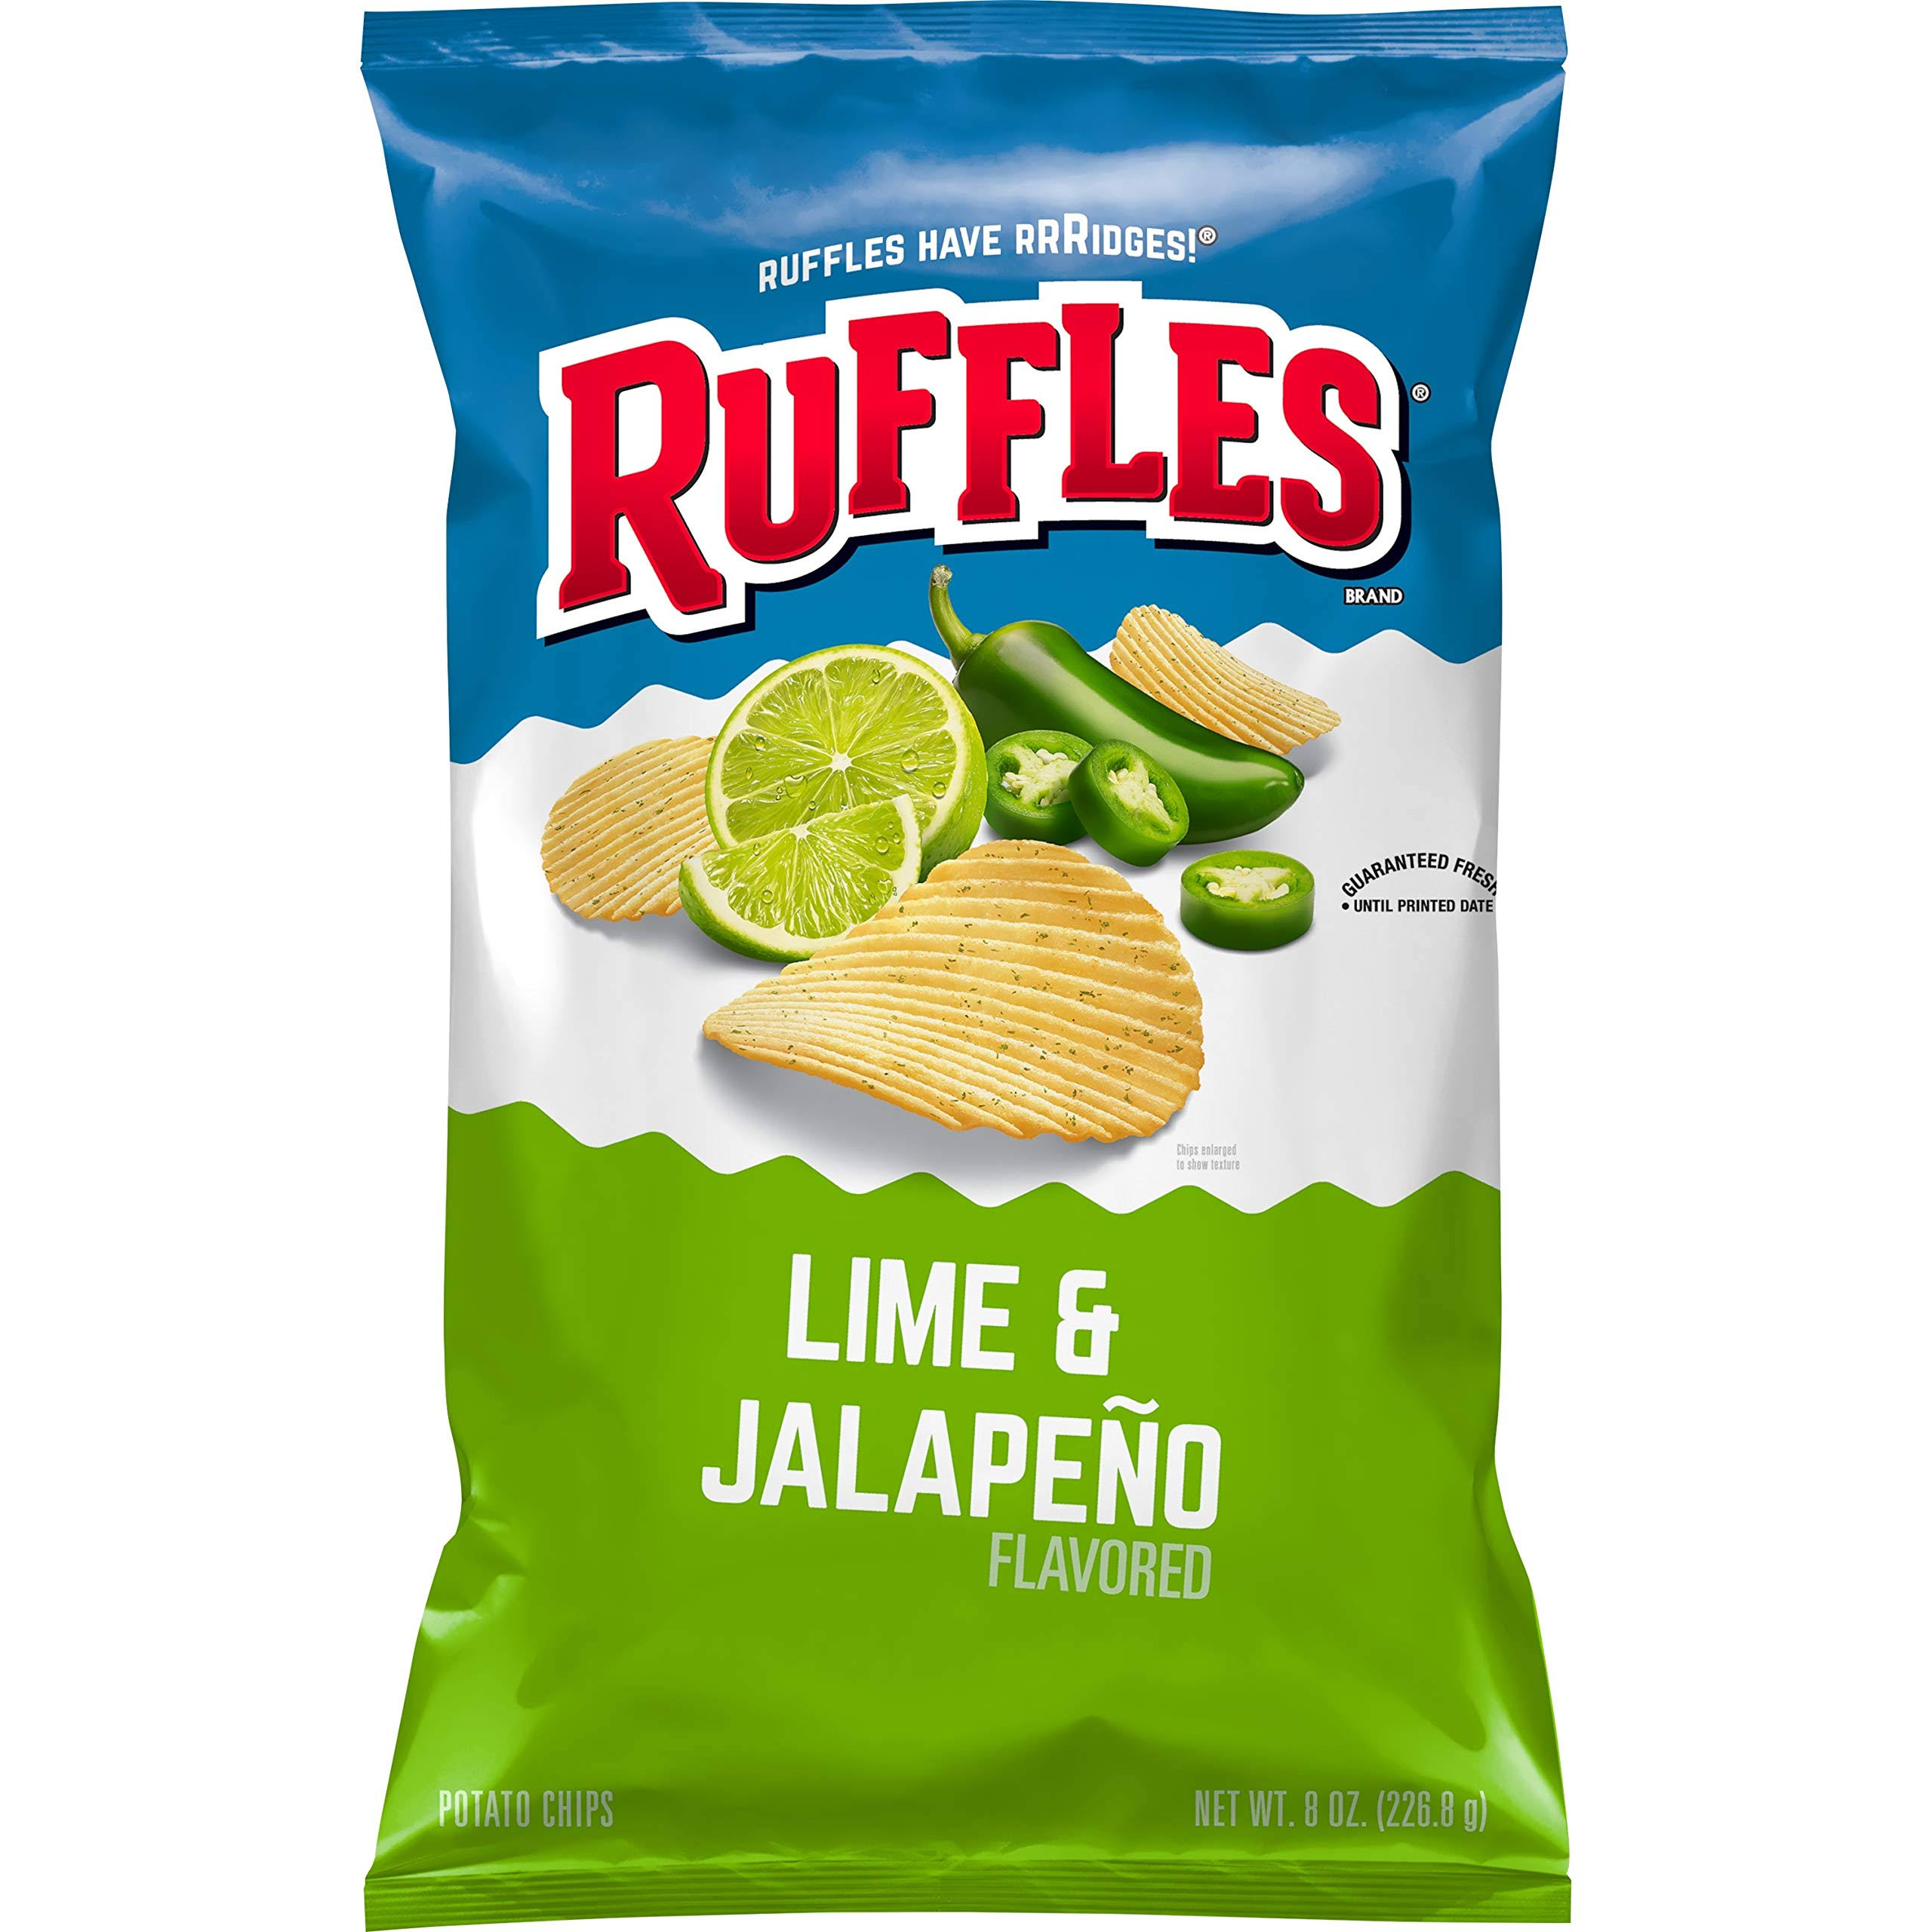 Ruffles Potato Chips Lime & Jalapeno, Cheddar Cheese, 8 Ounce